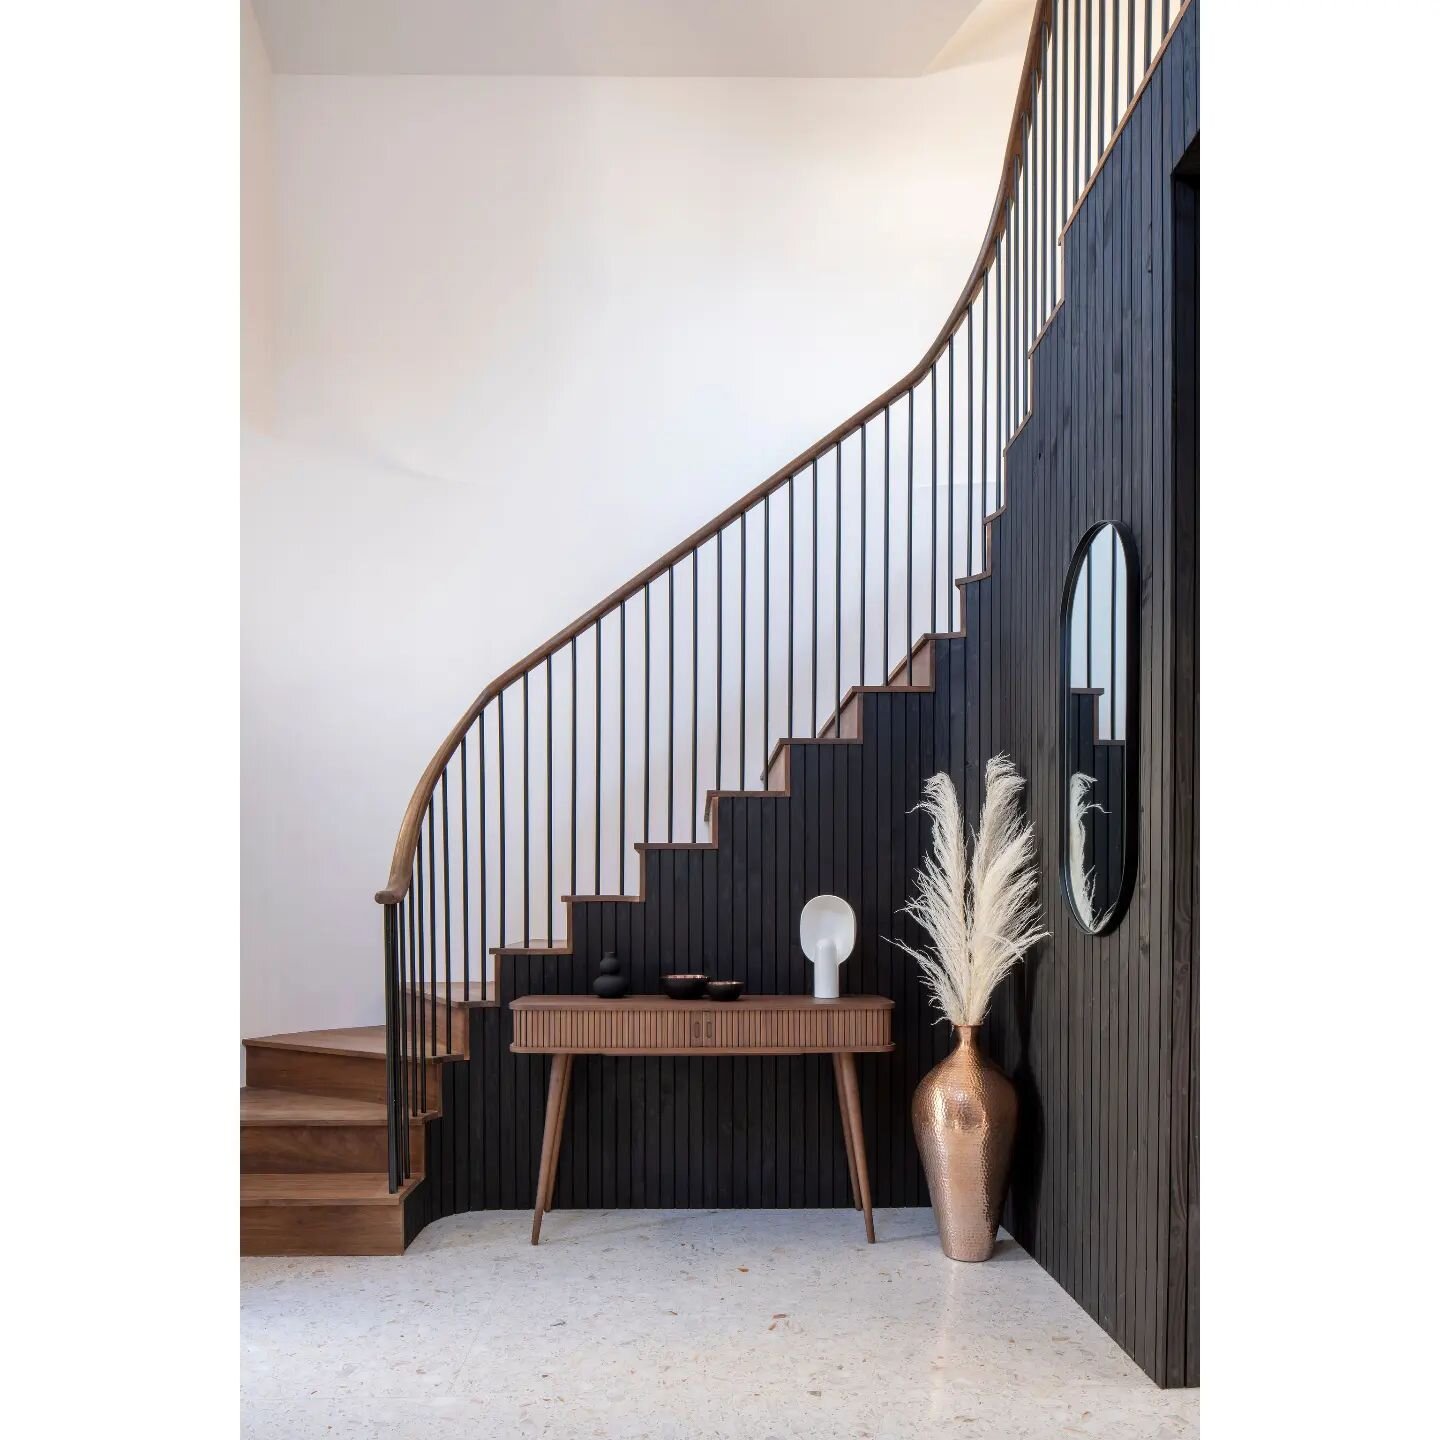 Entrance hall photos with stairs at our mews house project in Bray. 

Photography by @fionnmccann 

#irisharchitecture #irisharchitect #architect #architecture #design #stairs #home #hall #blacktimber #walnut #mews